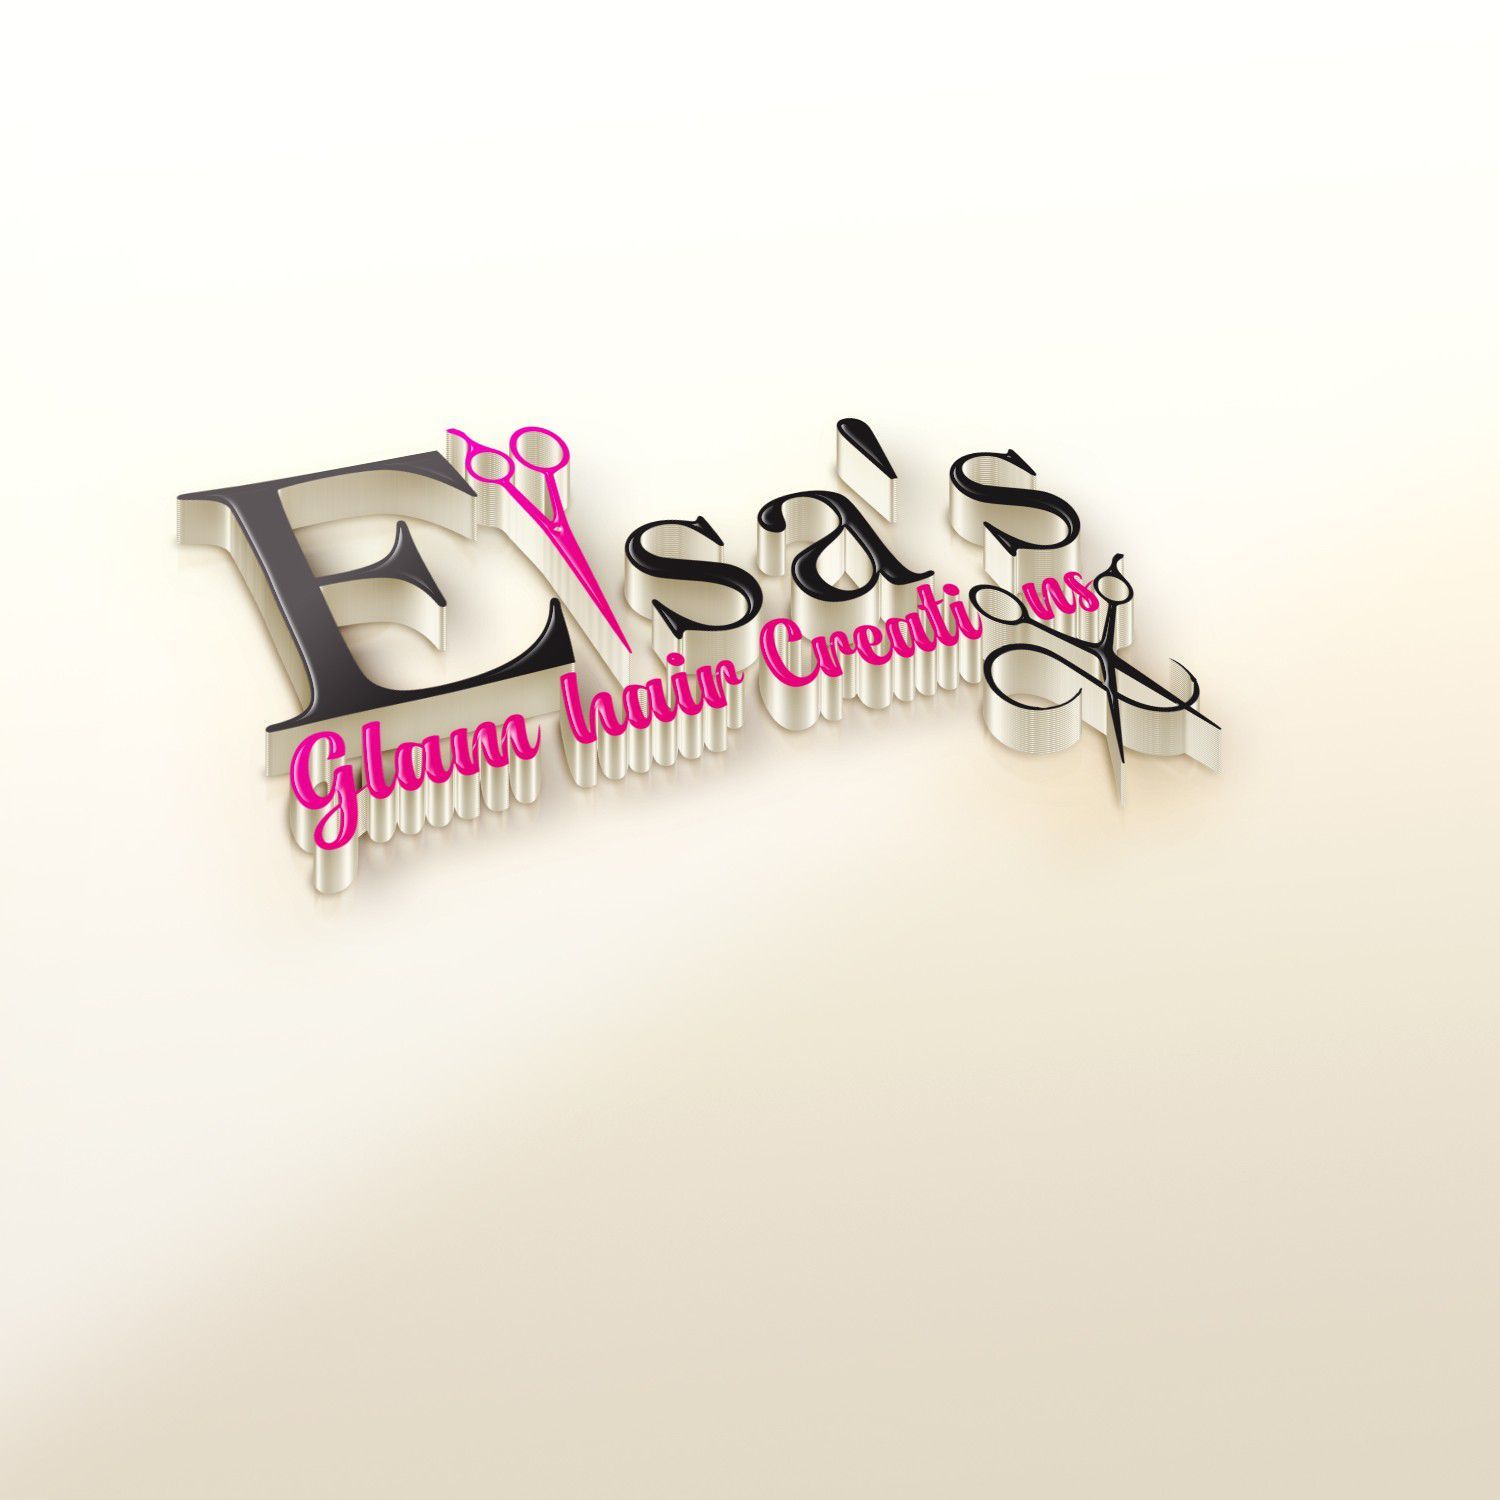 Elsa's Glam Creations, 9640 stirling rd, Suite 107, Cooper City, 33024